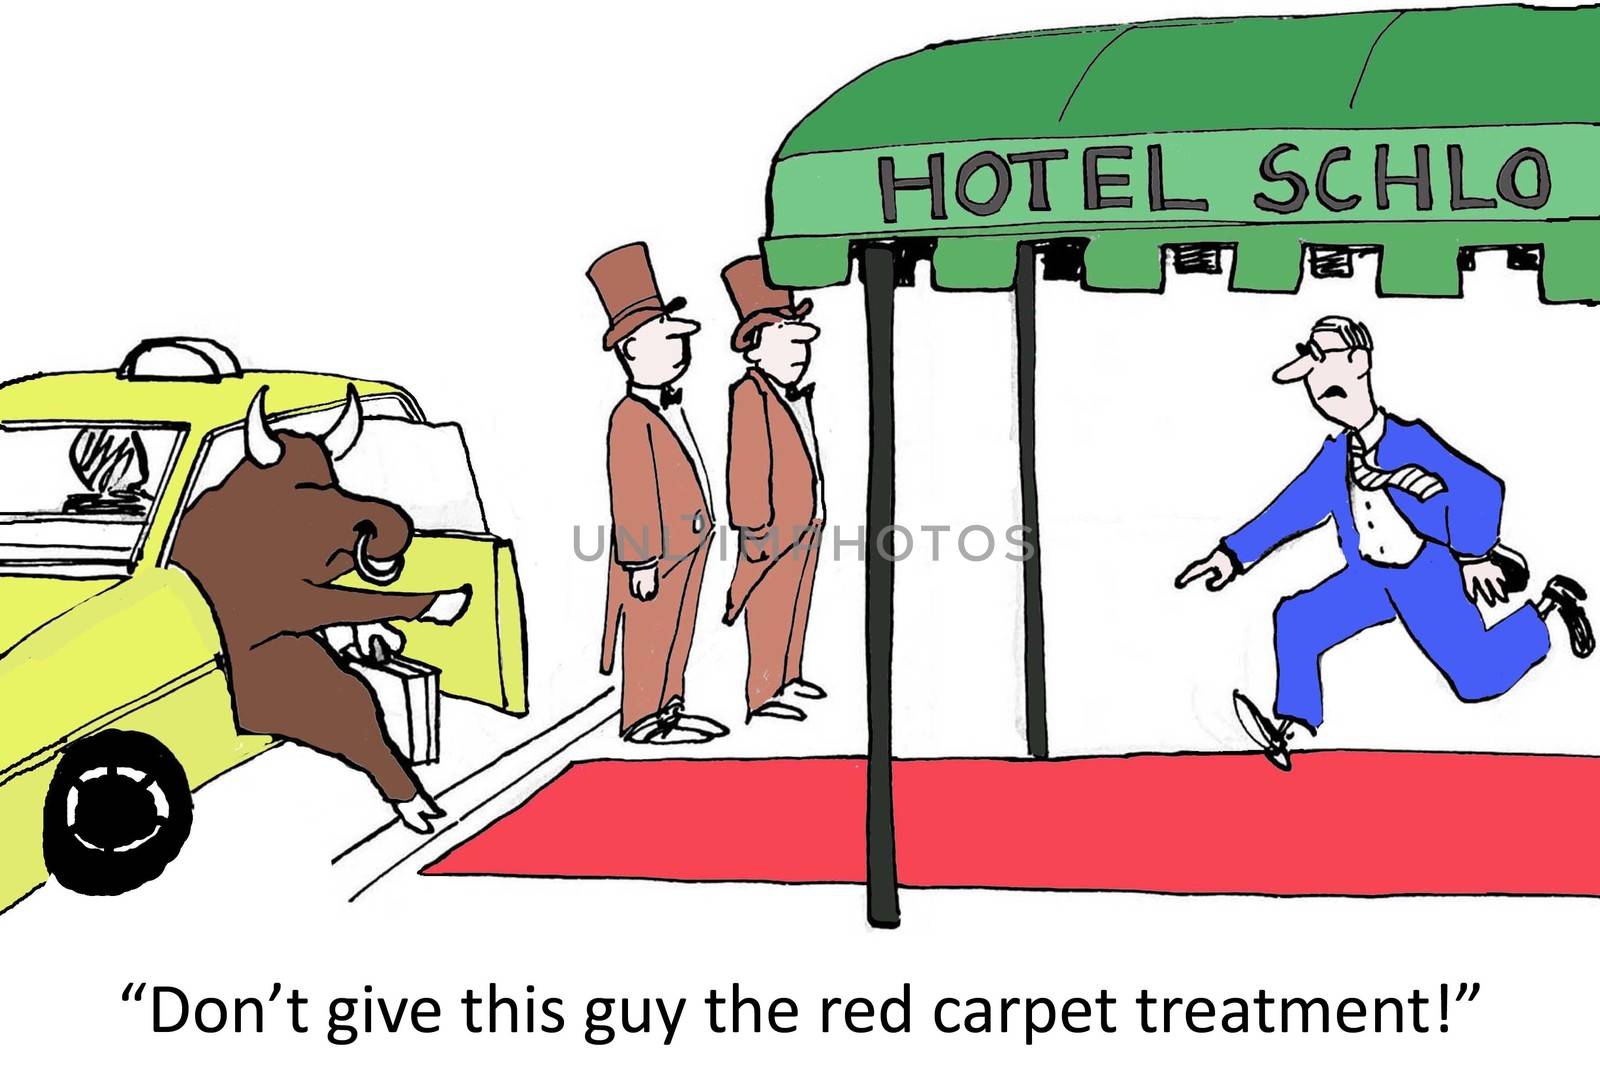 "Don't give this guy the red carpet treatment!"